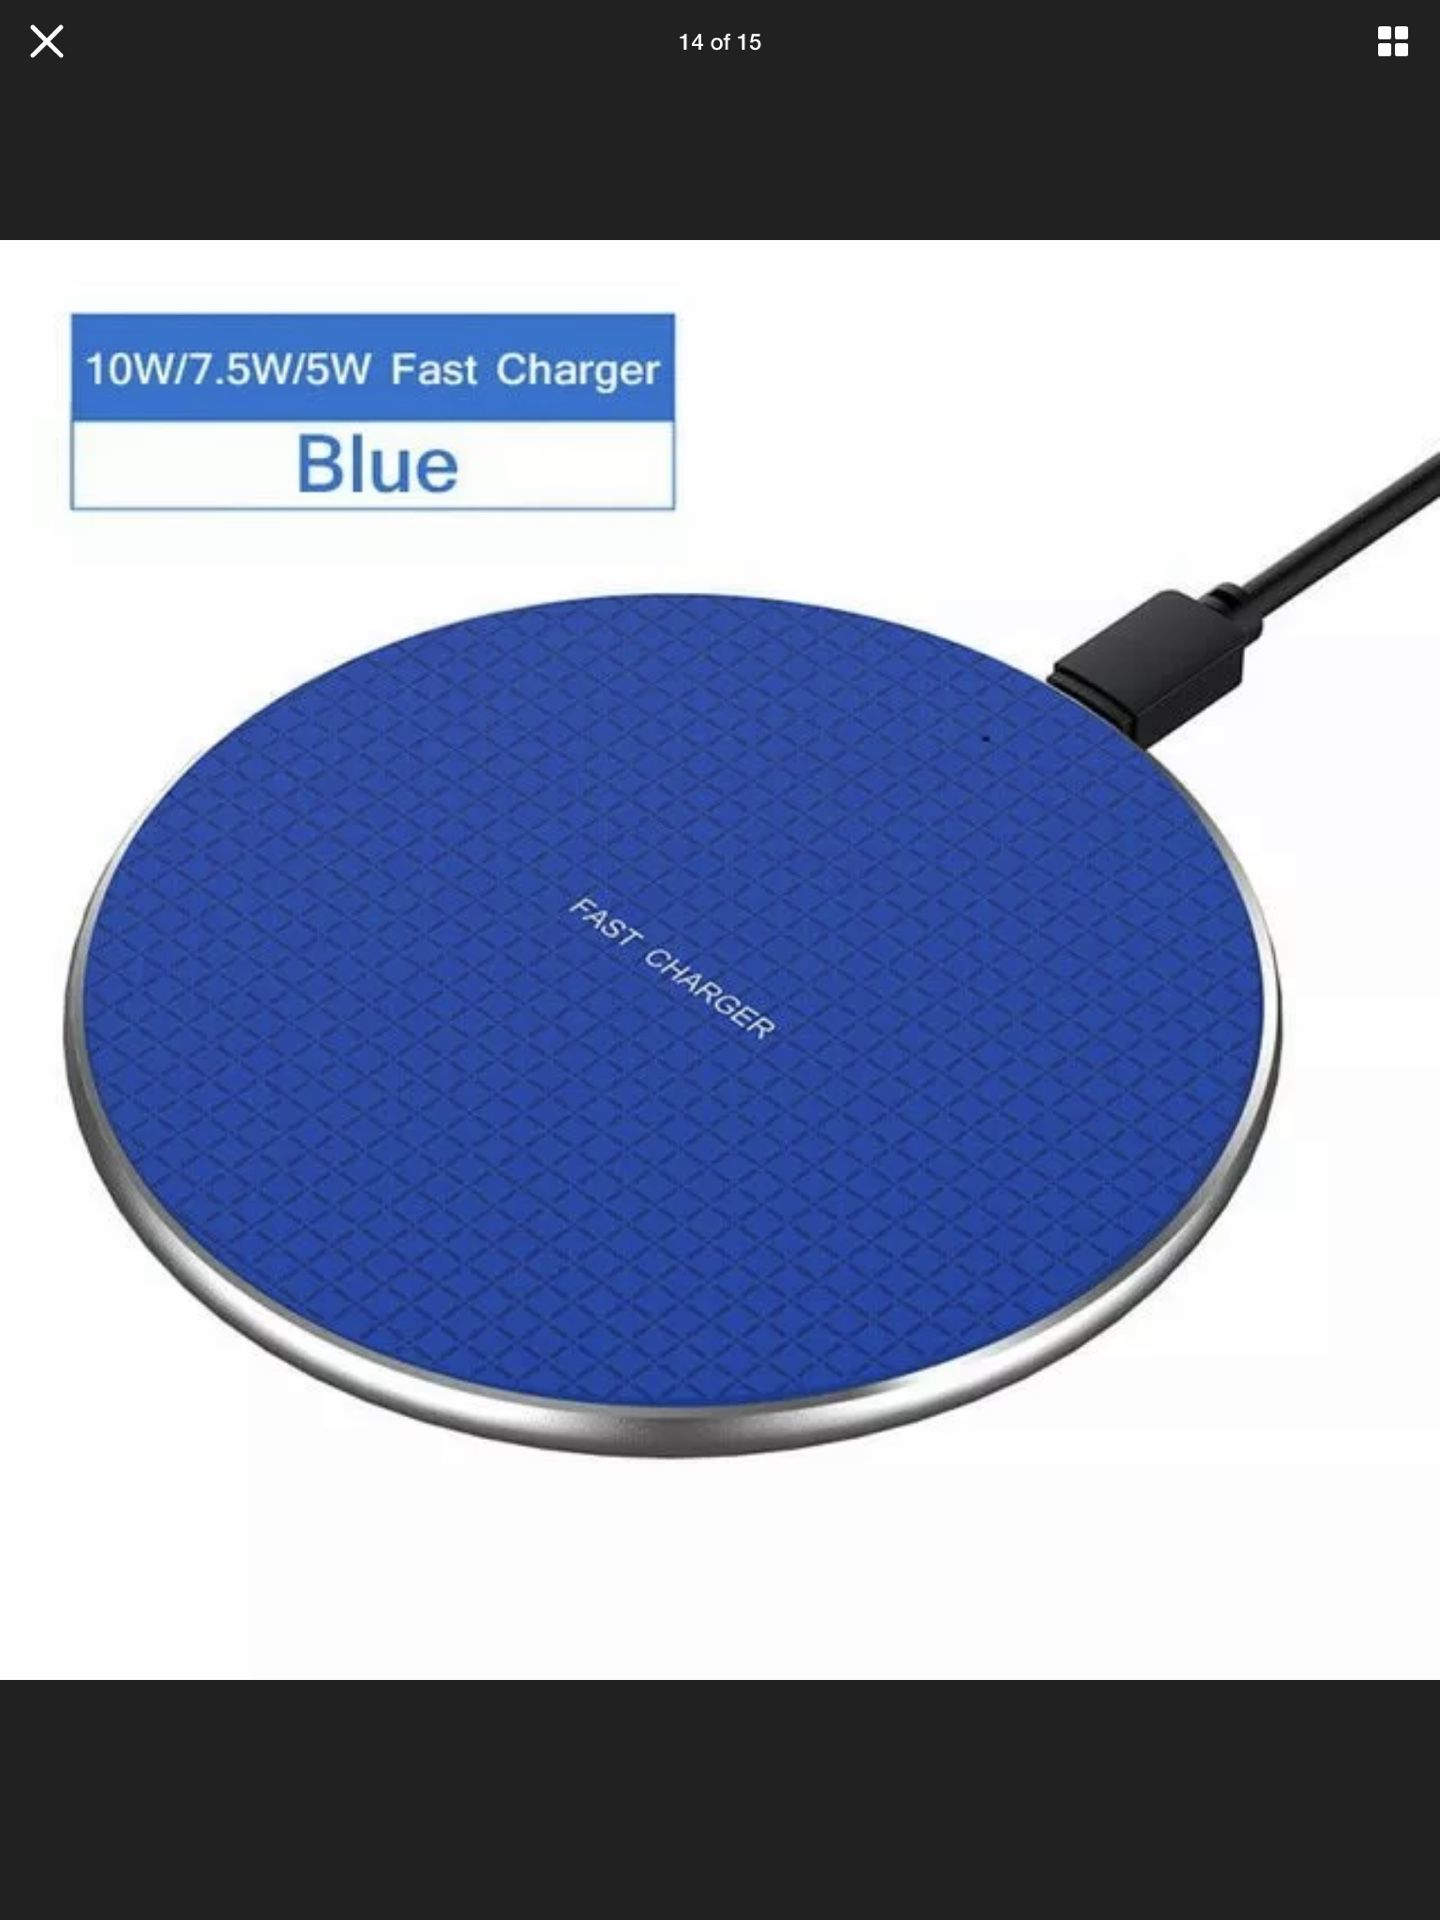 Blue Wireless Qi Charger - Samsung, iPhone, and more